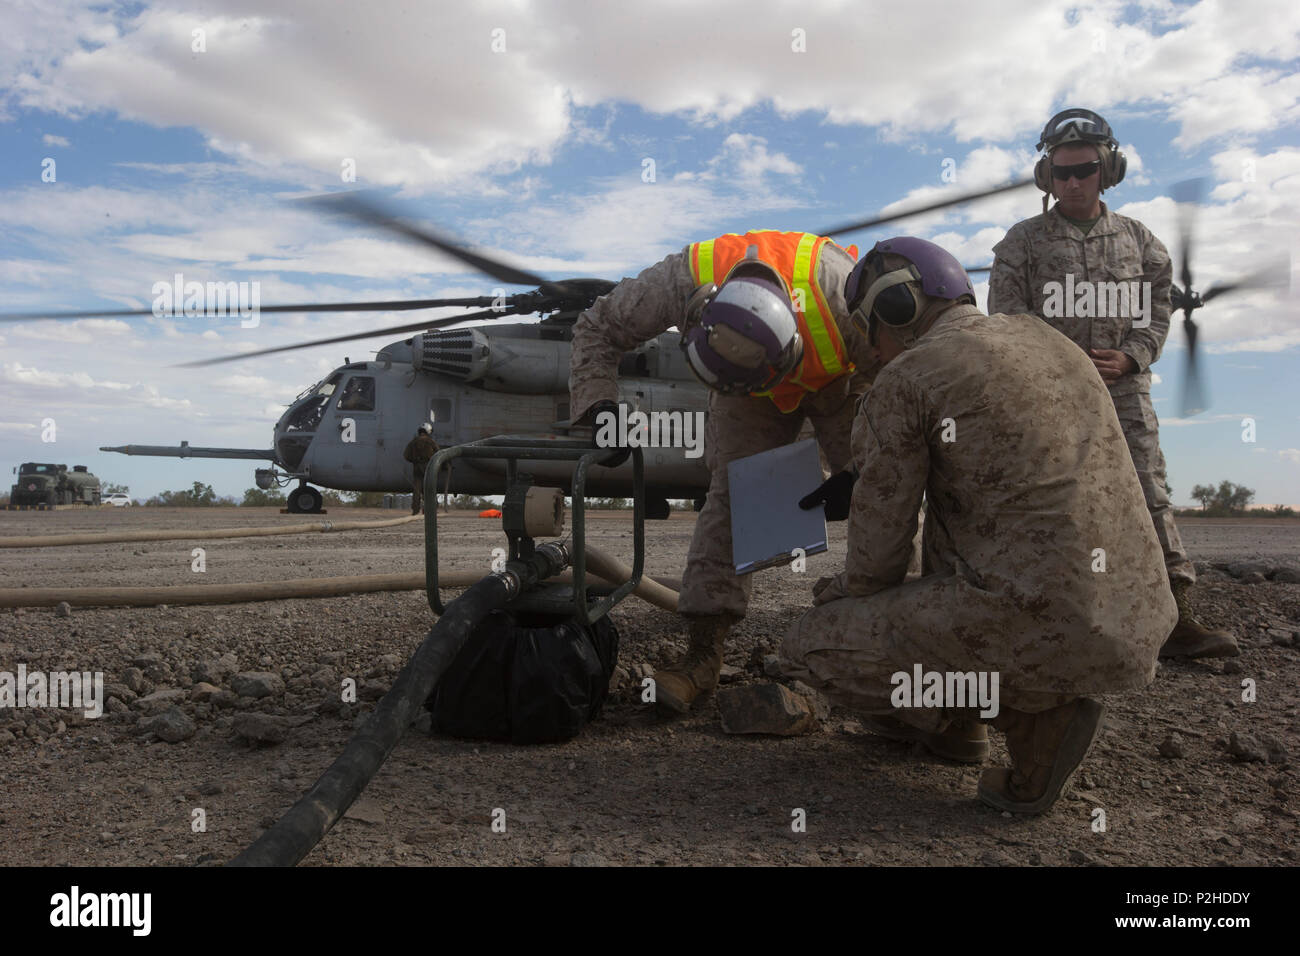 U.S. Marines assigned to Marine Aviation Weapons and Tactics Squadron One (MAWTS-1) refuel a CH-53E Super Stallion at a forward arming refueling point in support of Weapons and Tactics Instructor (WTI) course 1-17 at LZ Bull Assault, Calif., Sept. 27, 2016. This exercise was a part of WTI, a seven week training event, hosted by MAWTS-1 cadre, which emphasizes operational integration of the six functions of Marine Corps aviation in support of a Marine Air Ground Task Force. MAWTS-1 provides standardized advanced tactical training and certification of unit instructor qualifications to support Ma Stock Photo